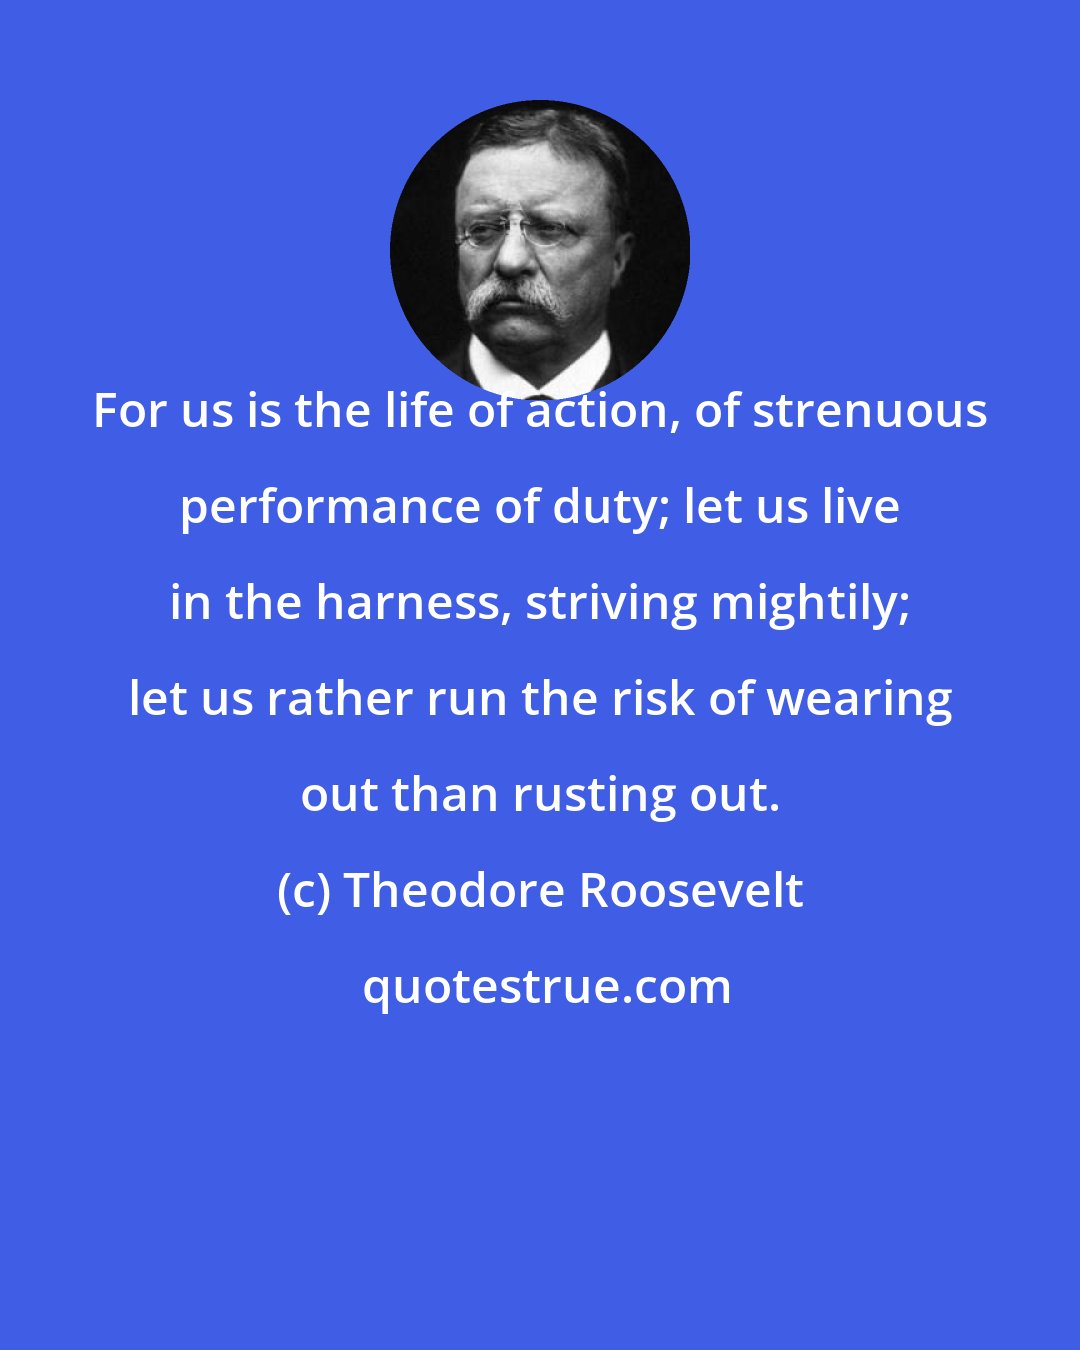 Theodore Roosevelt: For us is the life of action, of strenuous performance of duty; let us live in the harness, striving mightily; let us rather run the risk of wearing out than rusting out.